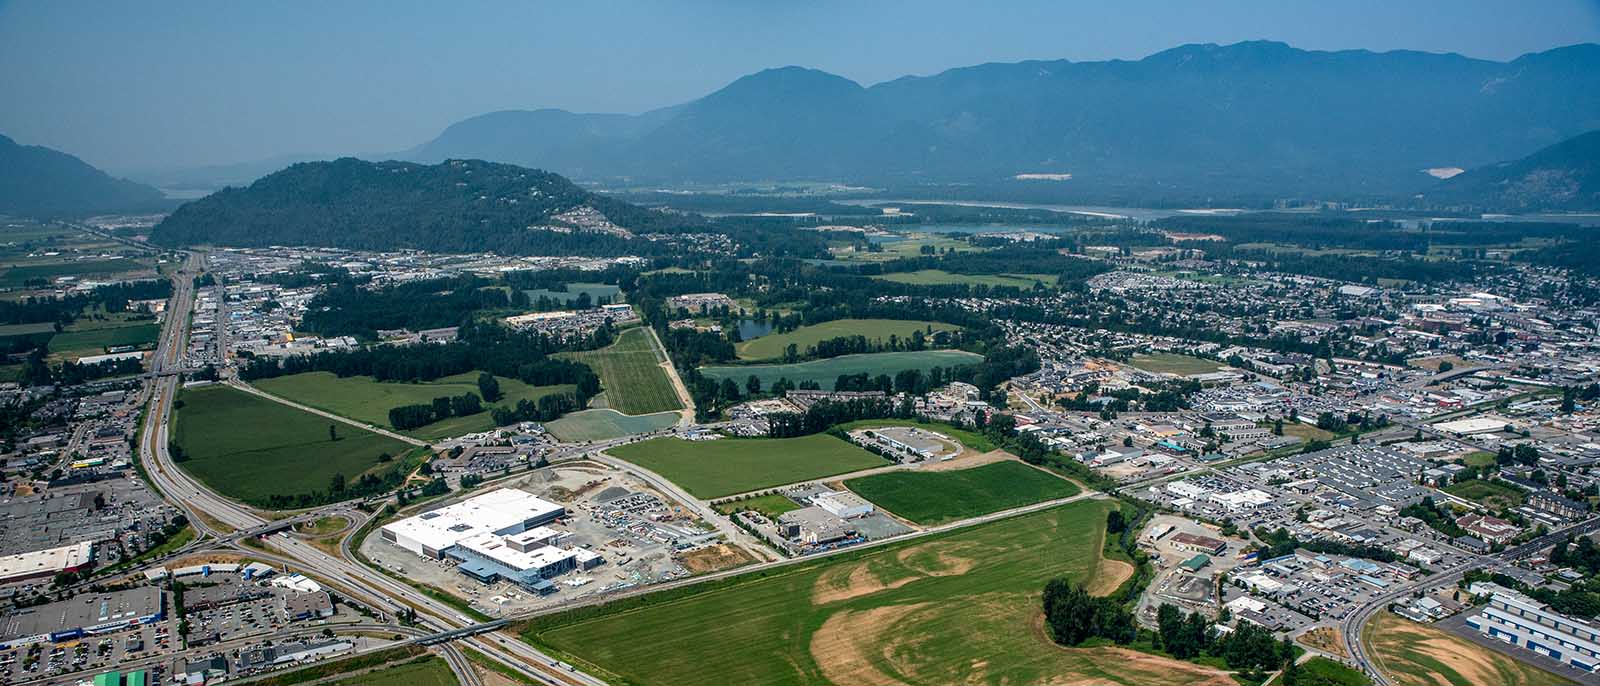 Aerial photo of Chilliwack, facing west with the airport and downtown visible on the right side of the image, Highway 1 and industrial buildings visible on the left side of the image